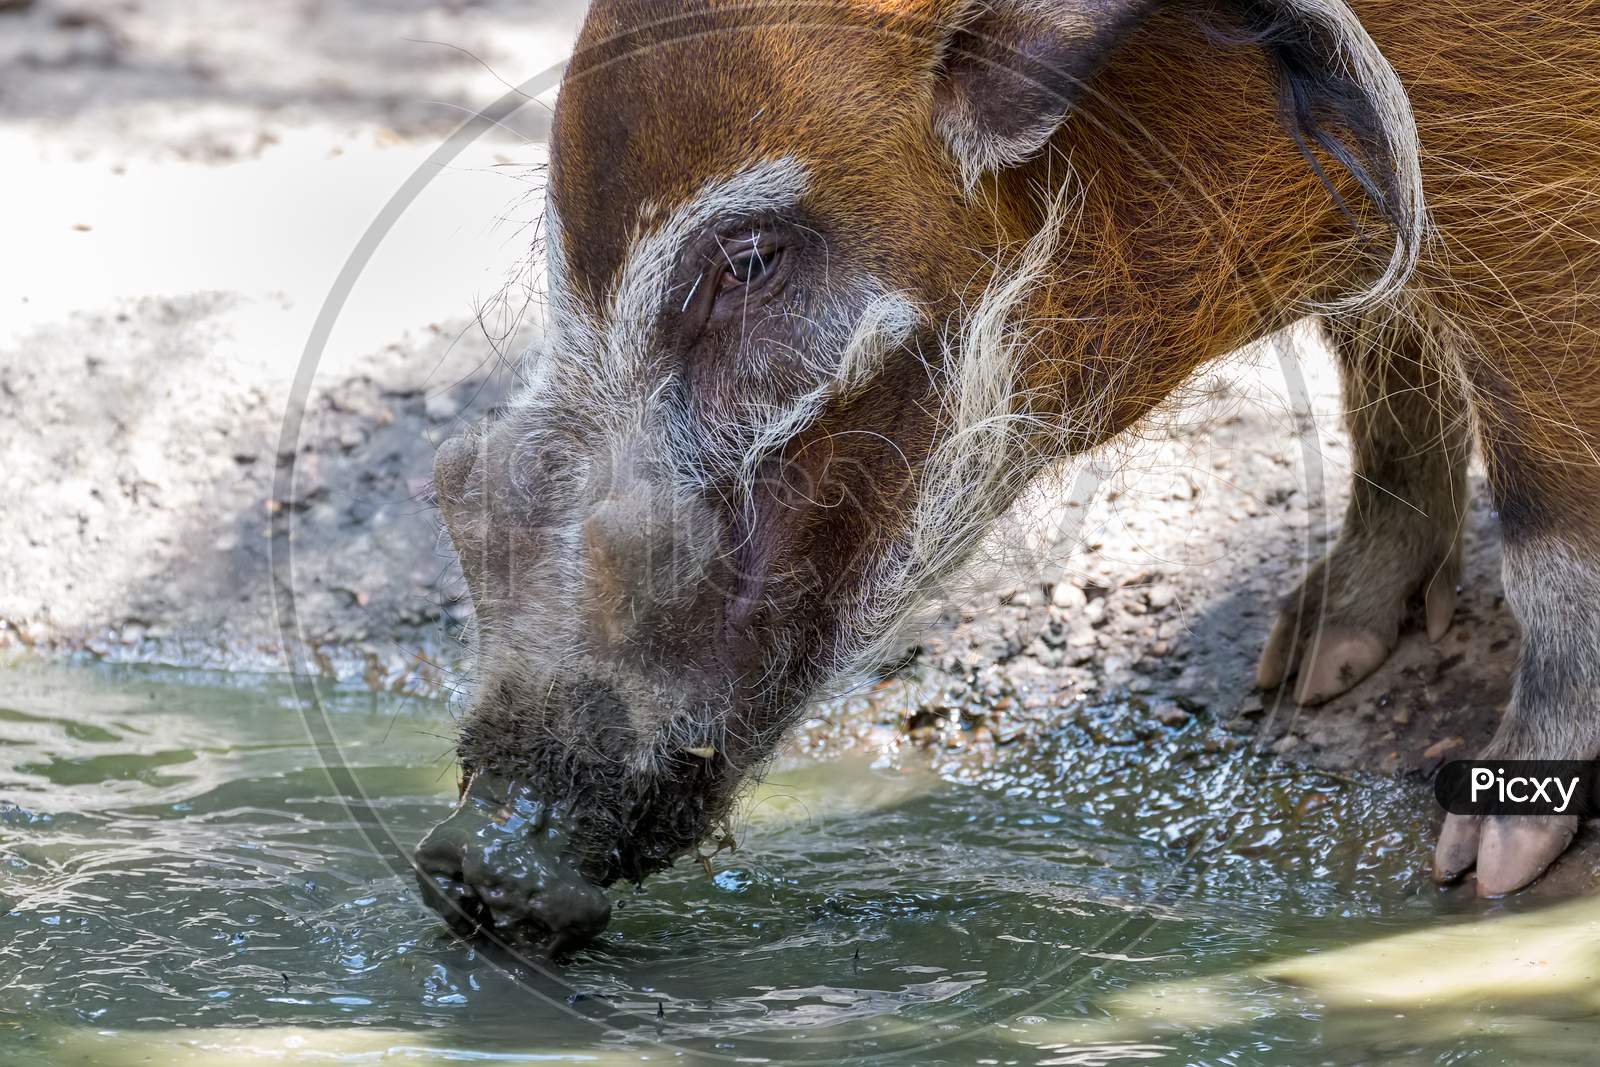 Red River Hog (Potamochoerus Porcus) Drinking From A Water Hole